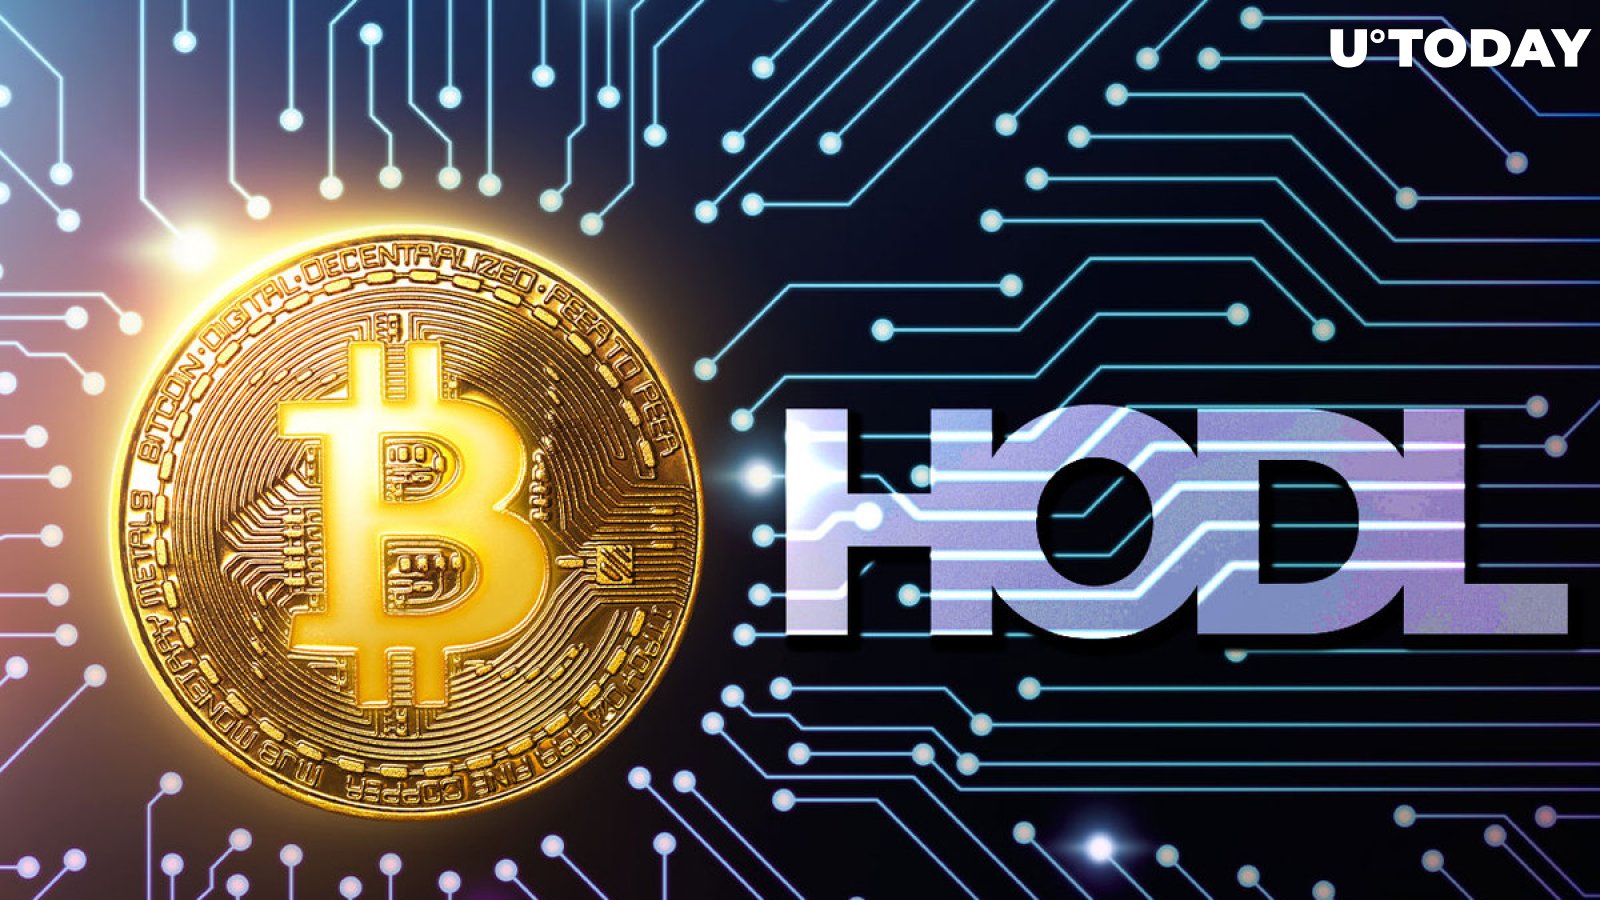 Major Bitcoin Miner Hut 8 Is Confident in HODL Strategy, While BTC Exchange Inflow Volume Reaches Monthly Low